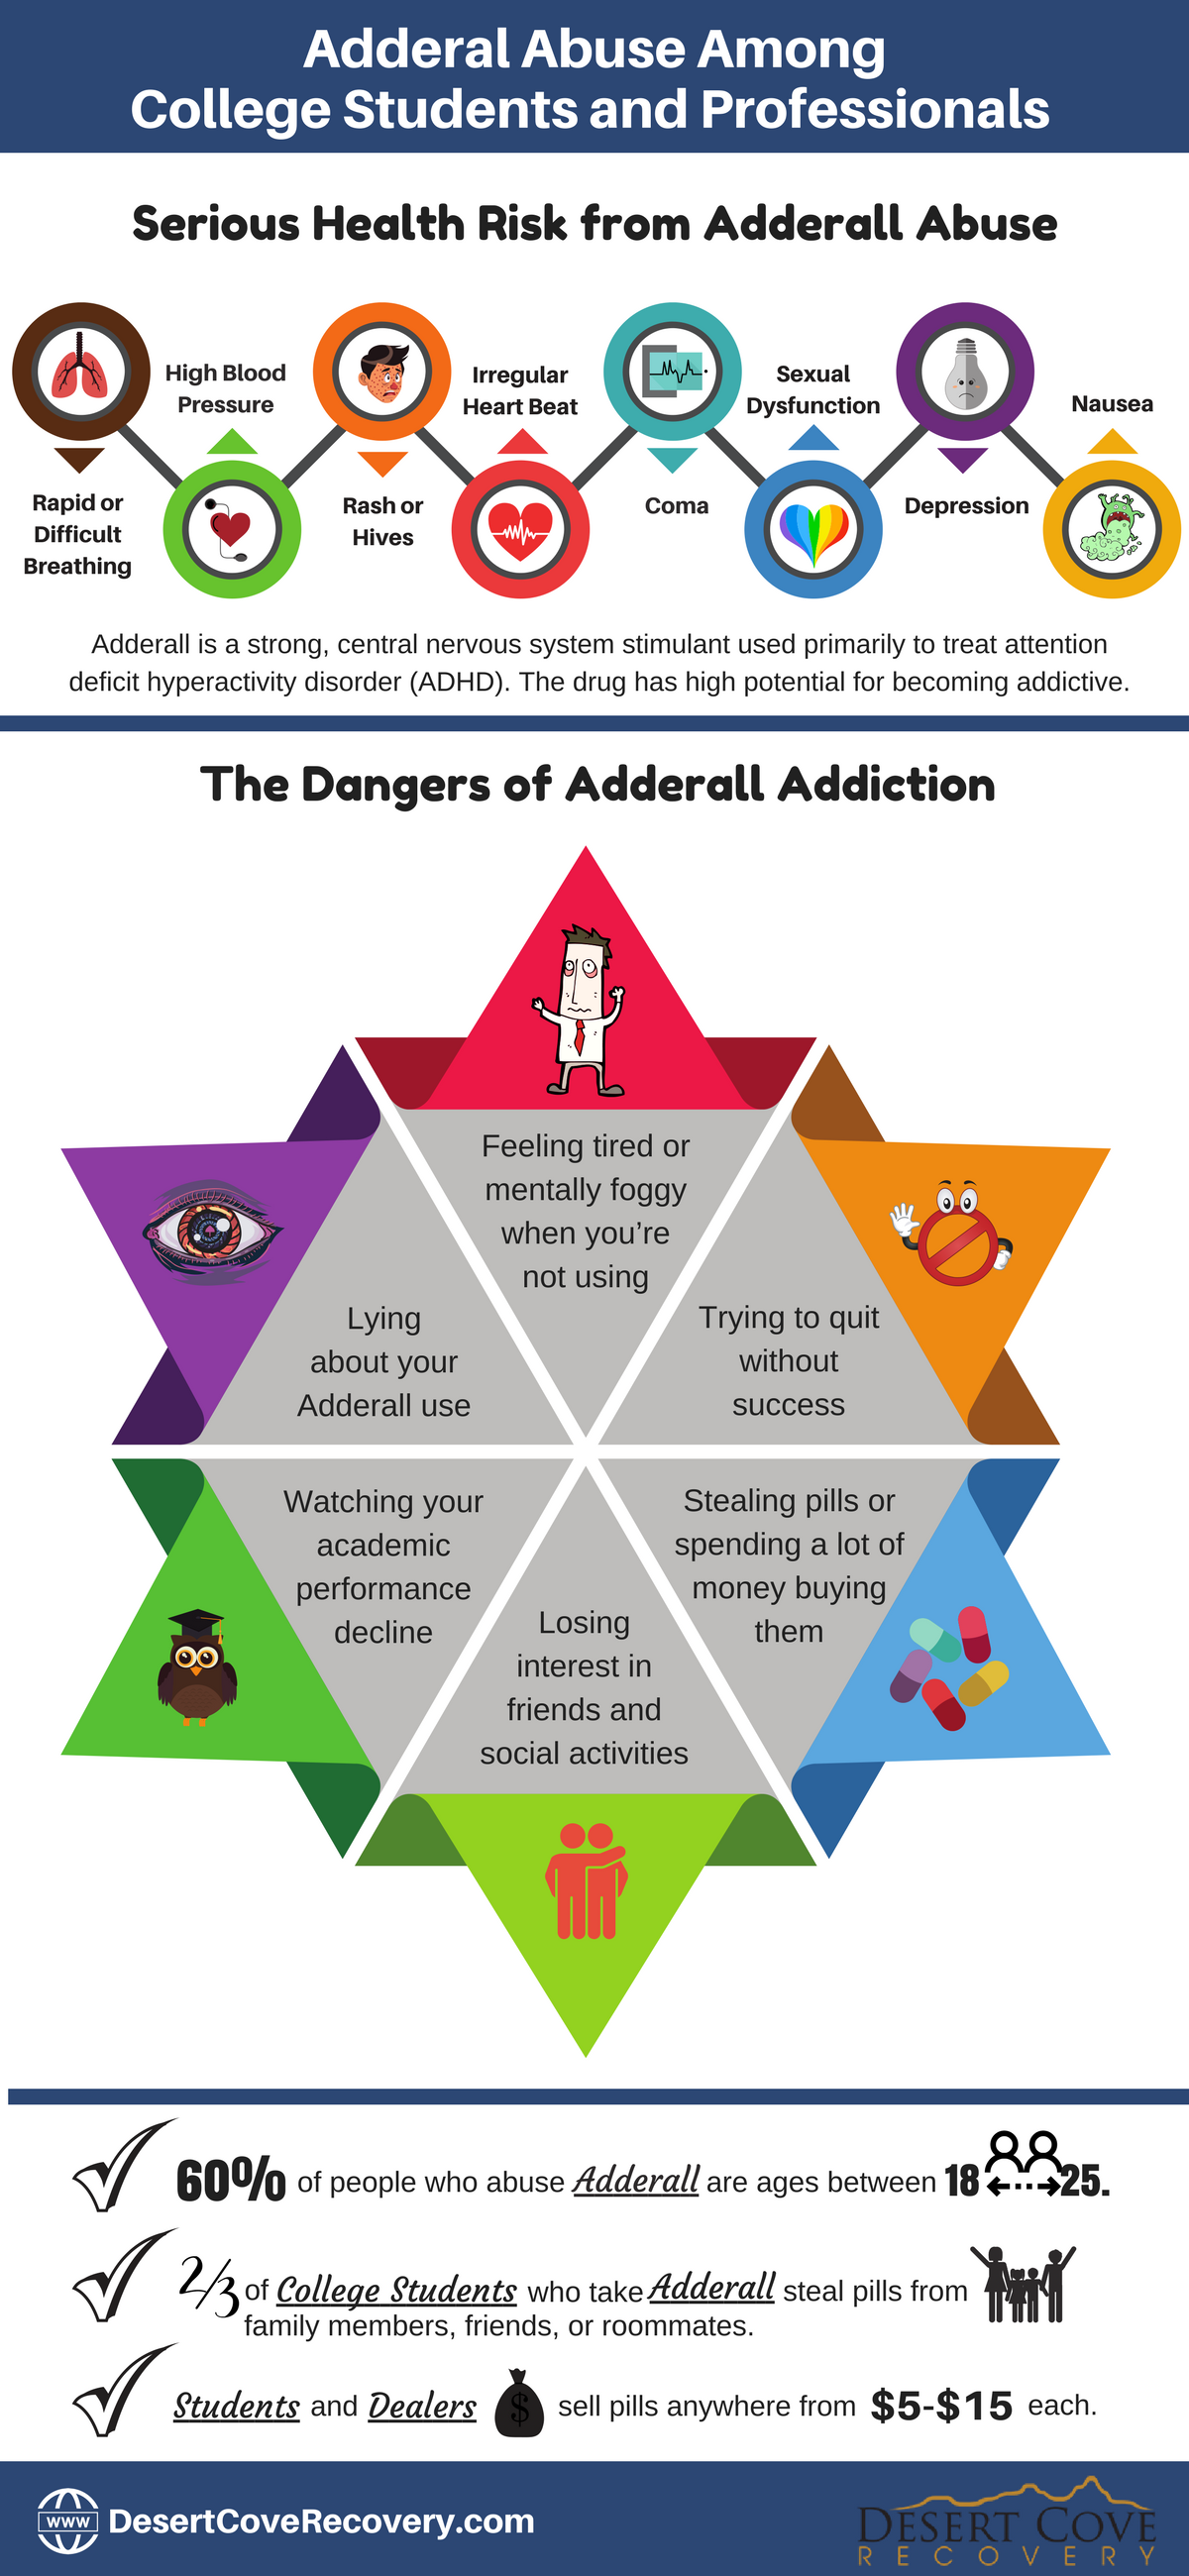 Why do college students want Adderall?